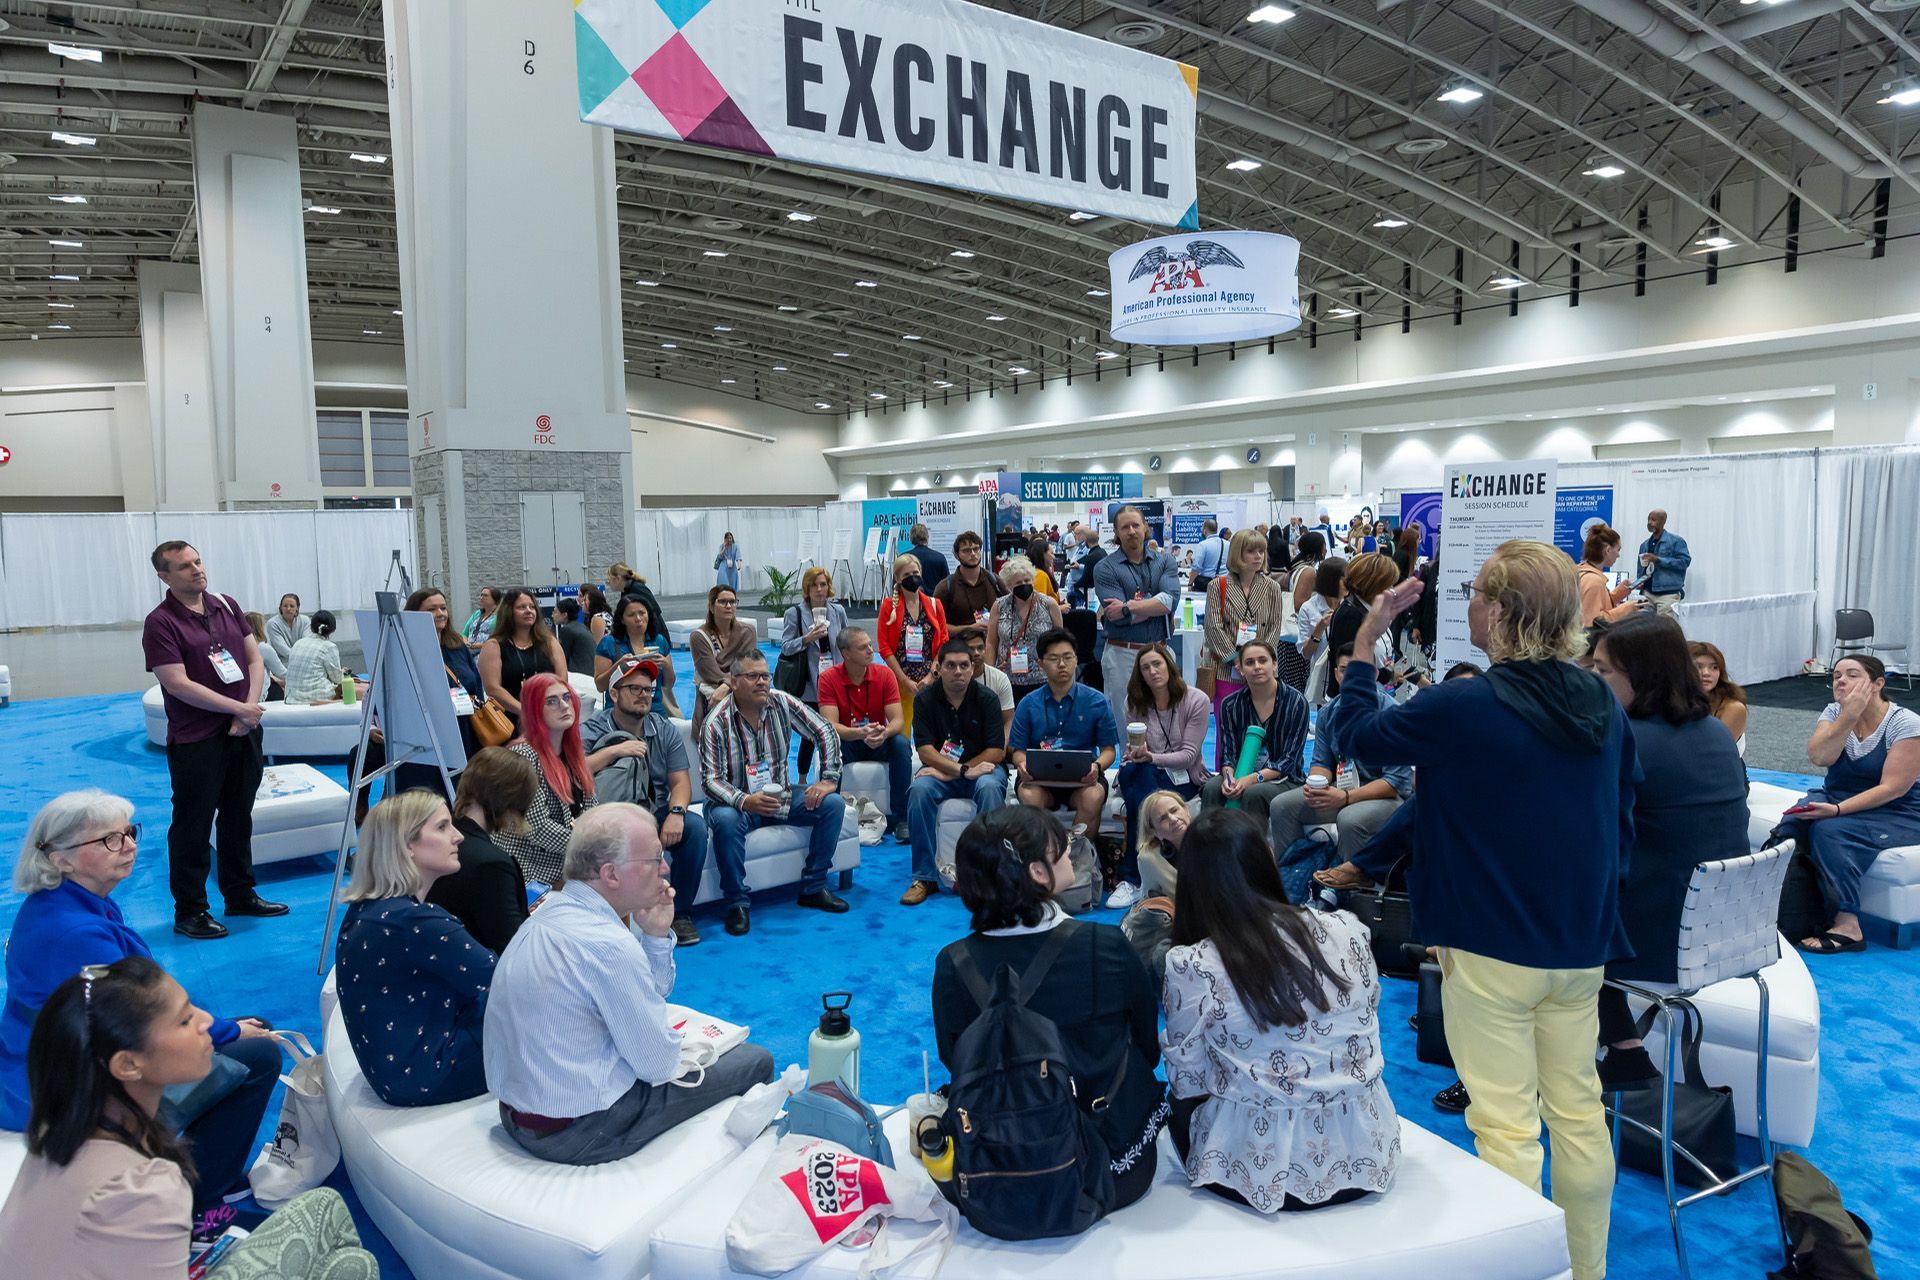 A group of people are sitting in a room under a sign that says exchange.